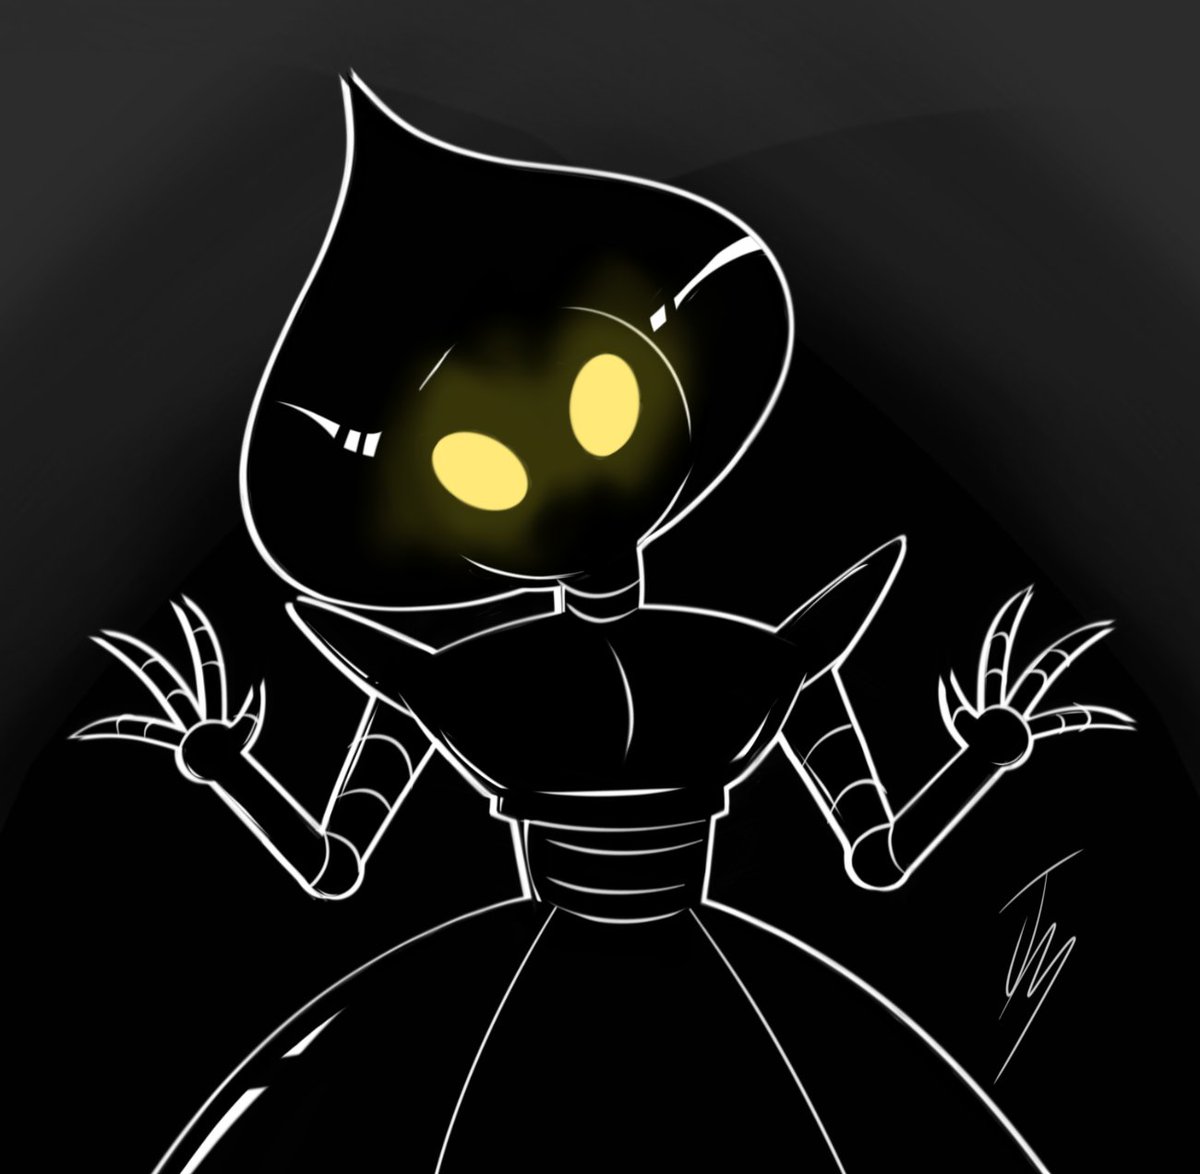 「quick flatwoods monster for the spooky s」|Jac 🔆のイラスト